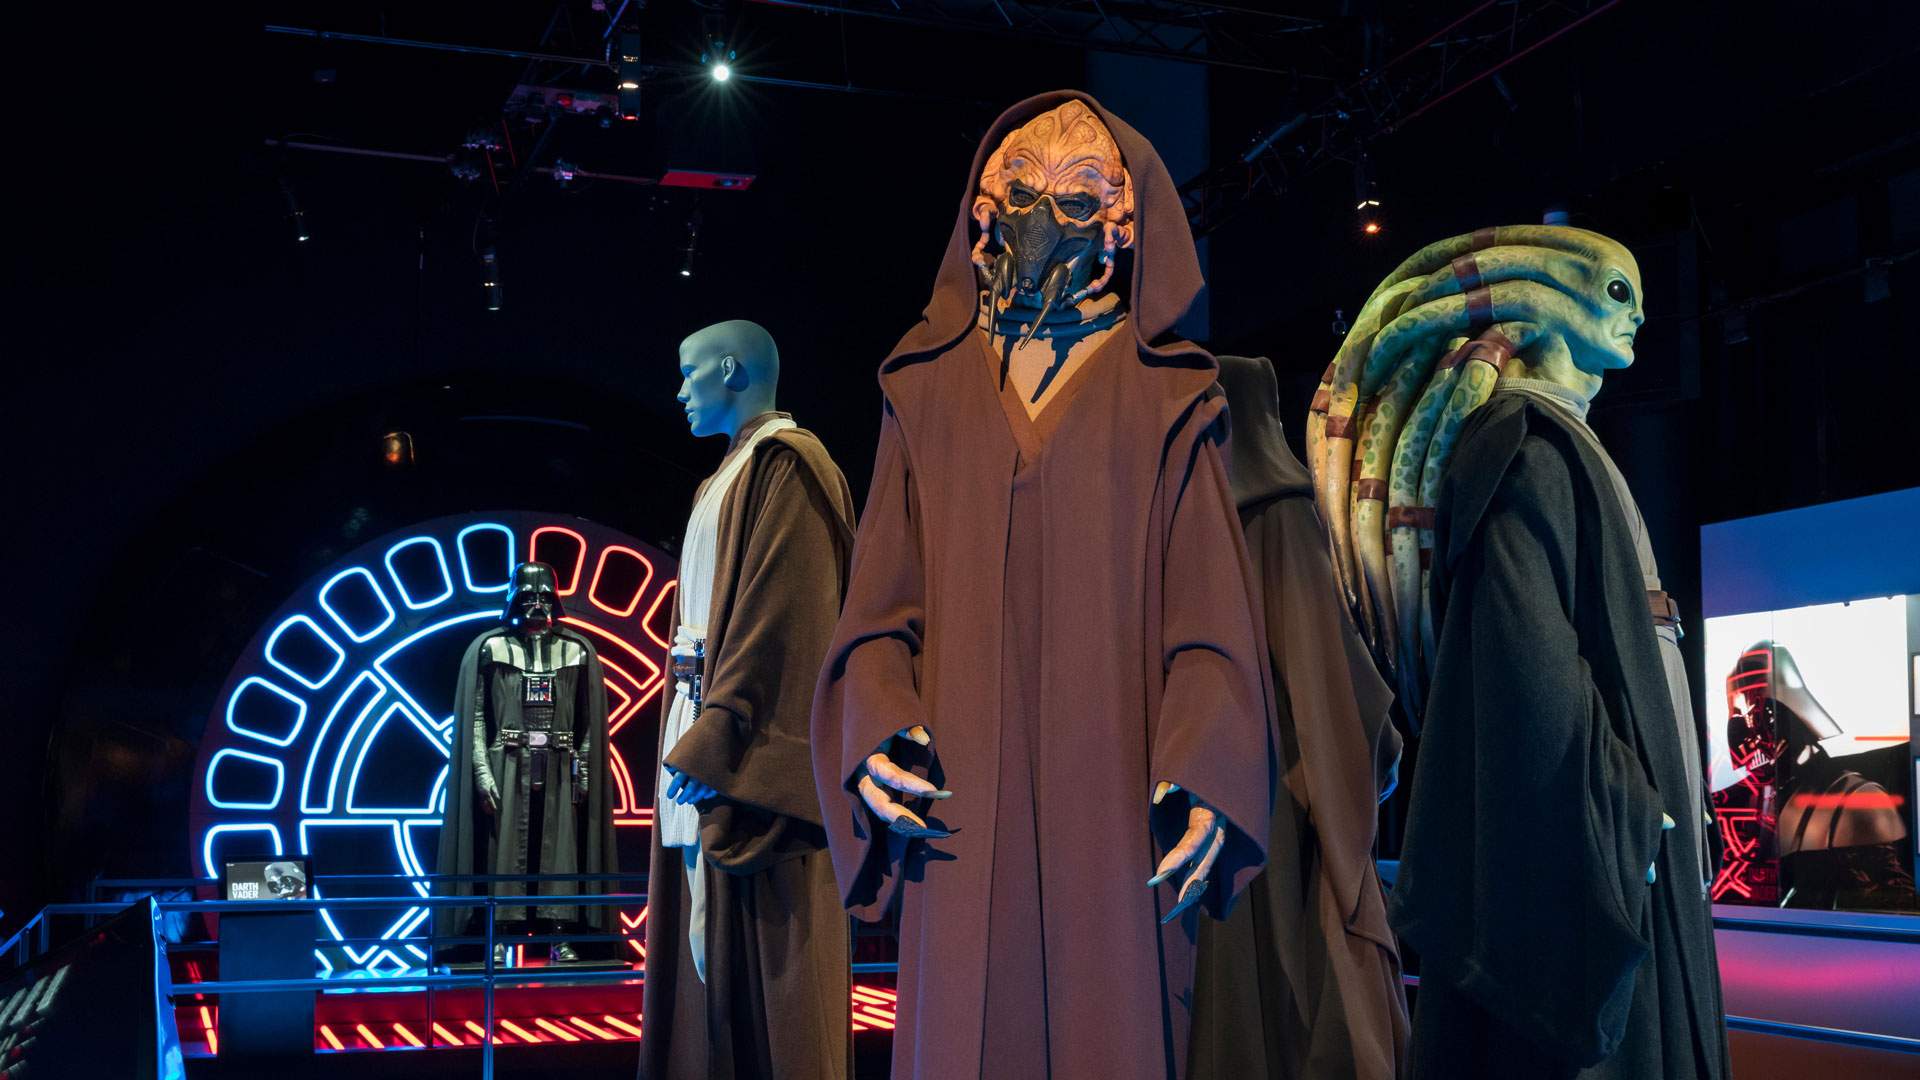 'Star Wars' Identities: The Exhibition